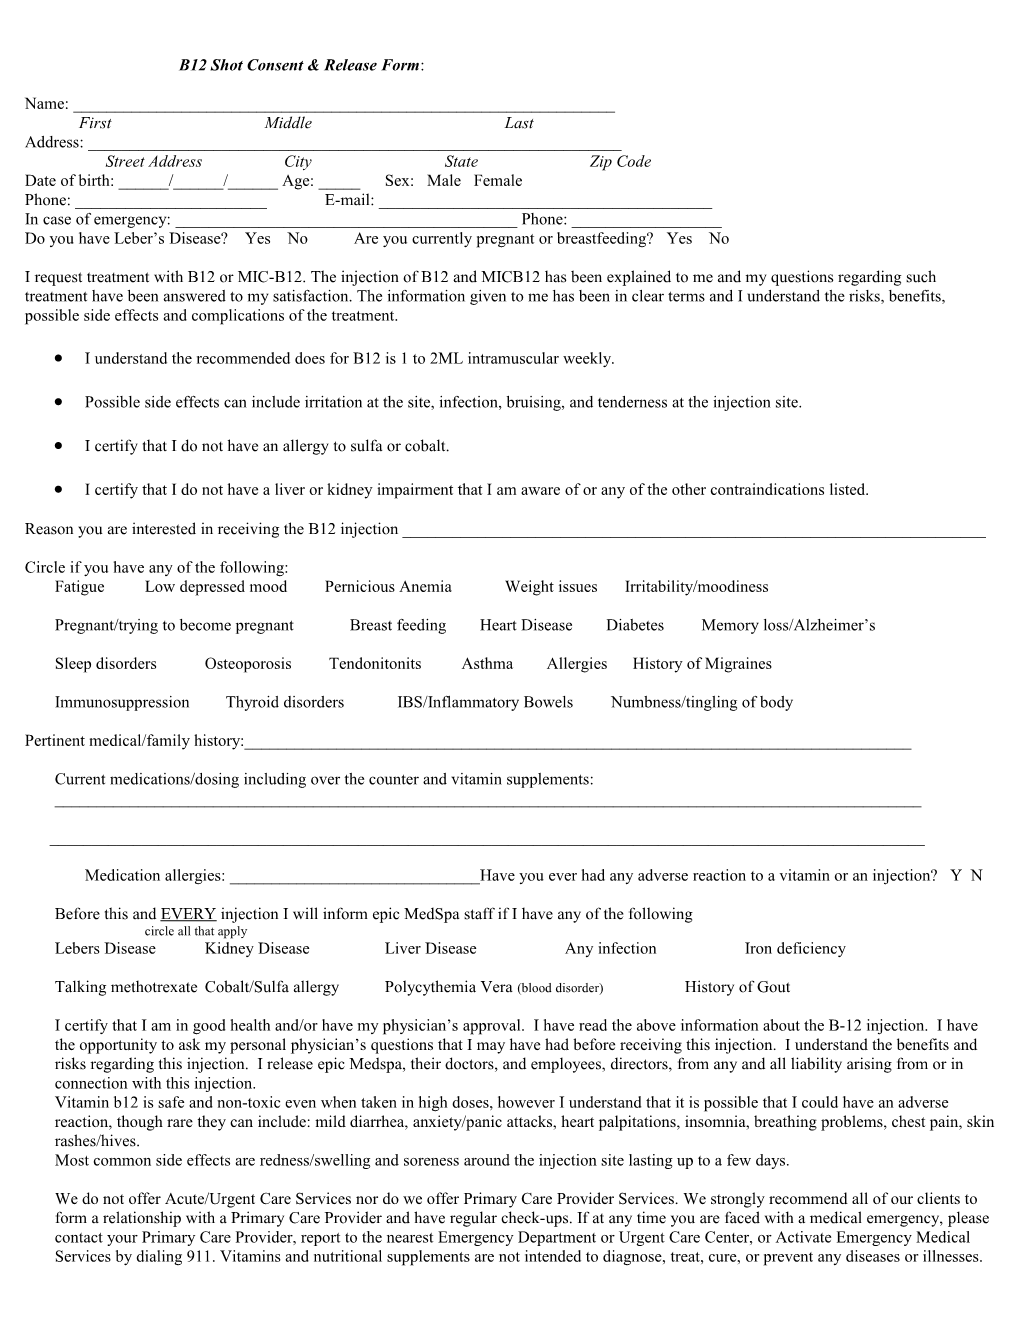 B12 Shot Consent & Release Form